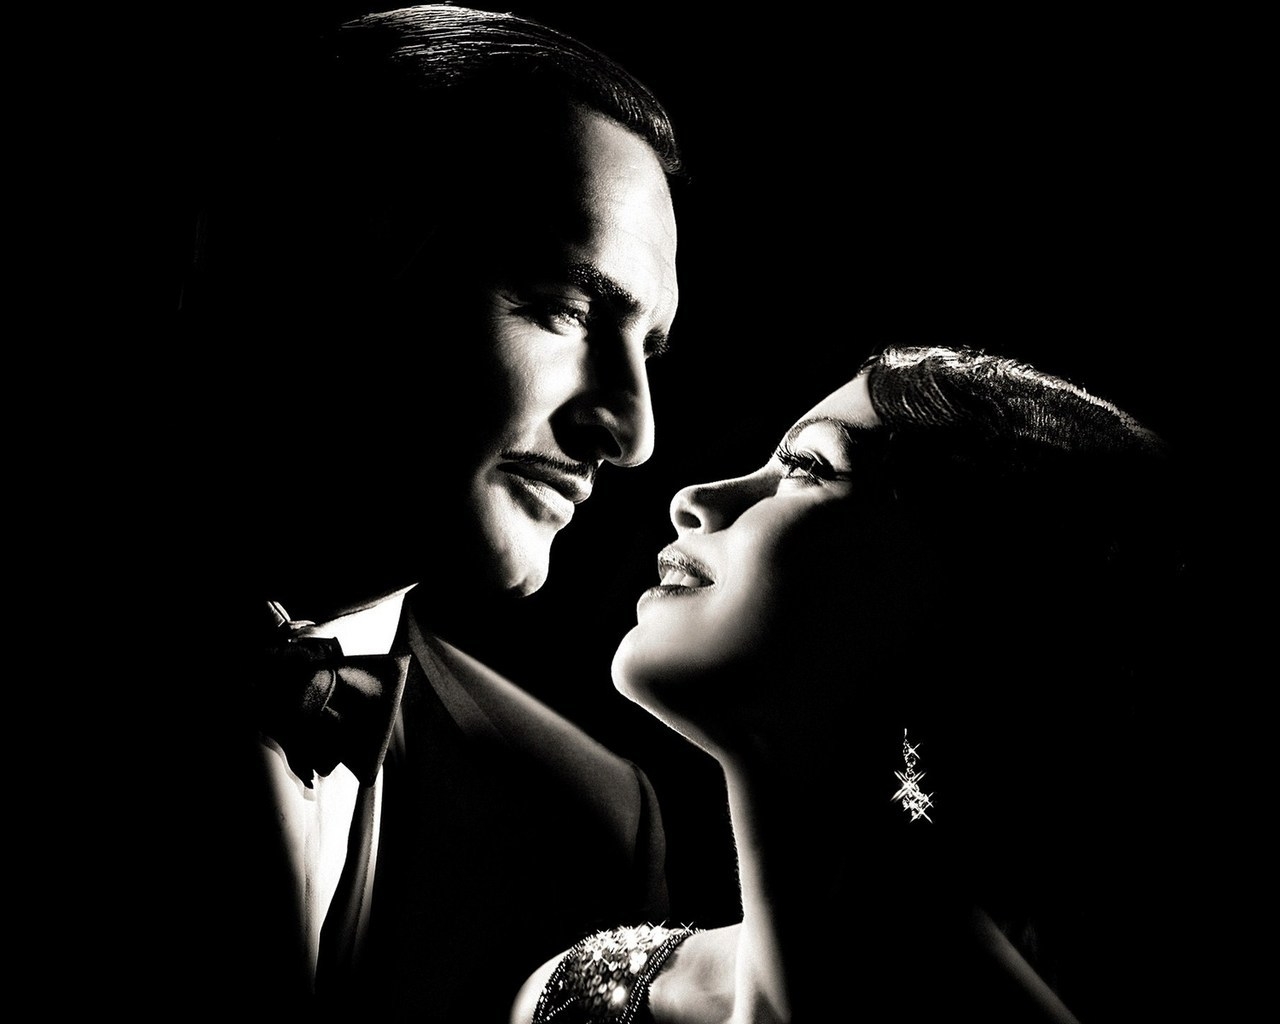 Jean Dujardin and Berenice Bezho for 1280 x 1024 resolution